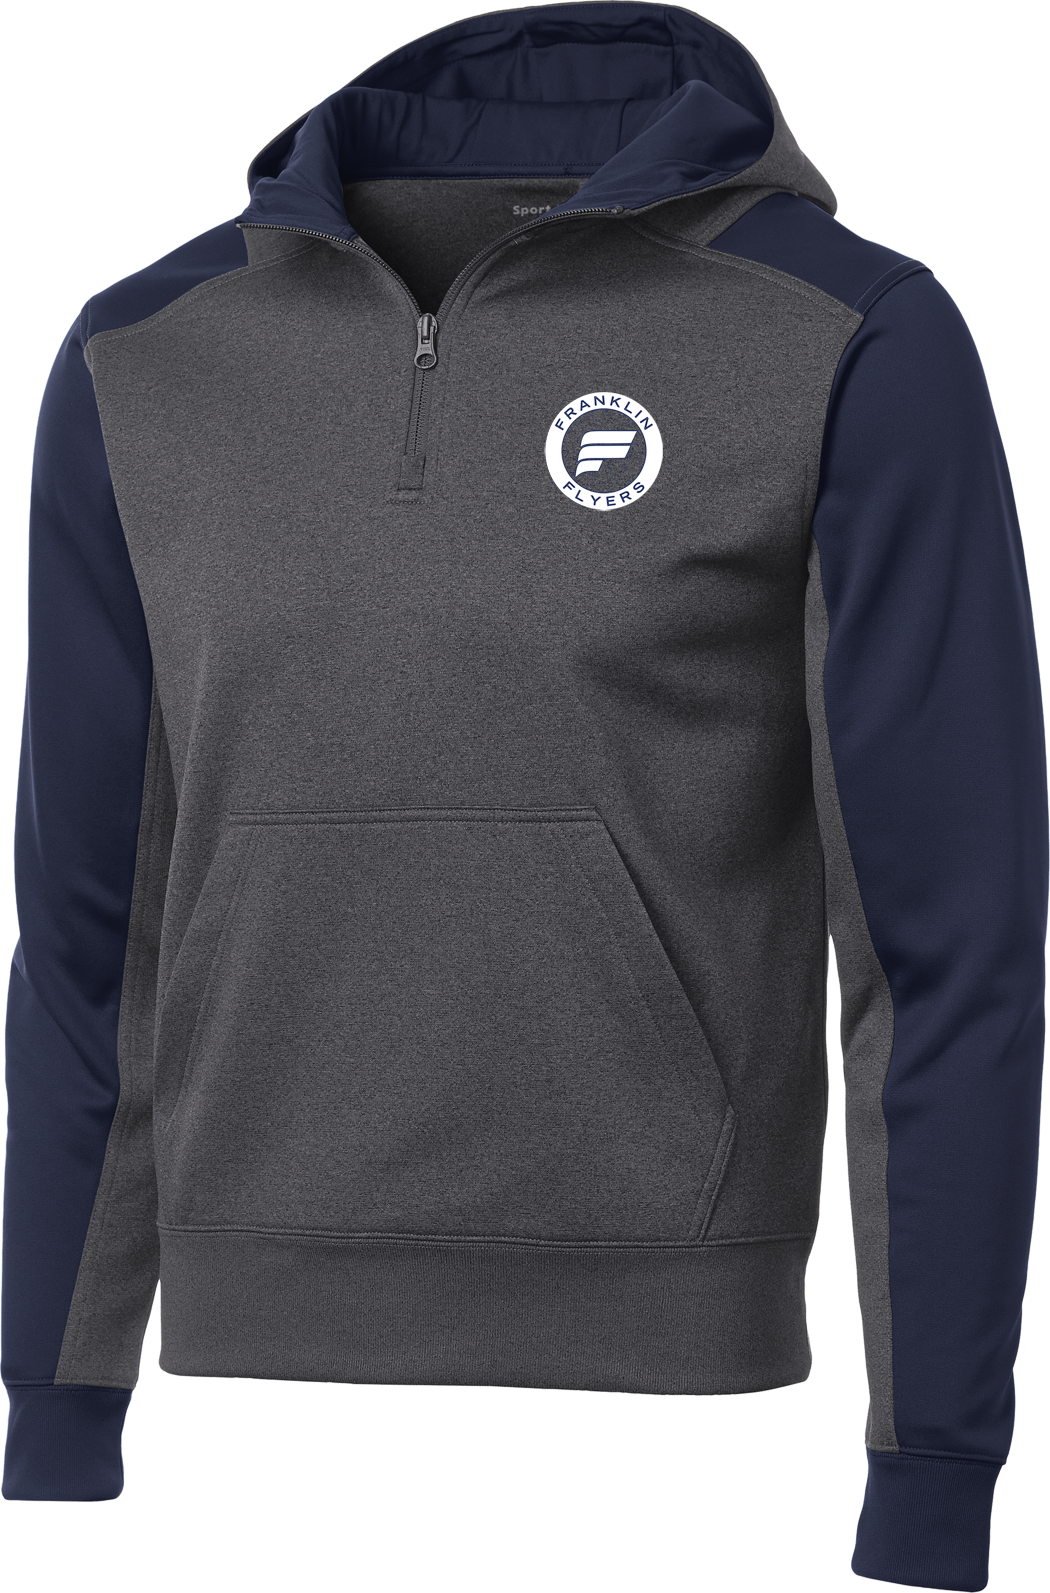 Franklin Flyers Hoodies and Sweatshirts – Direct Team Sports